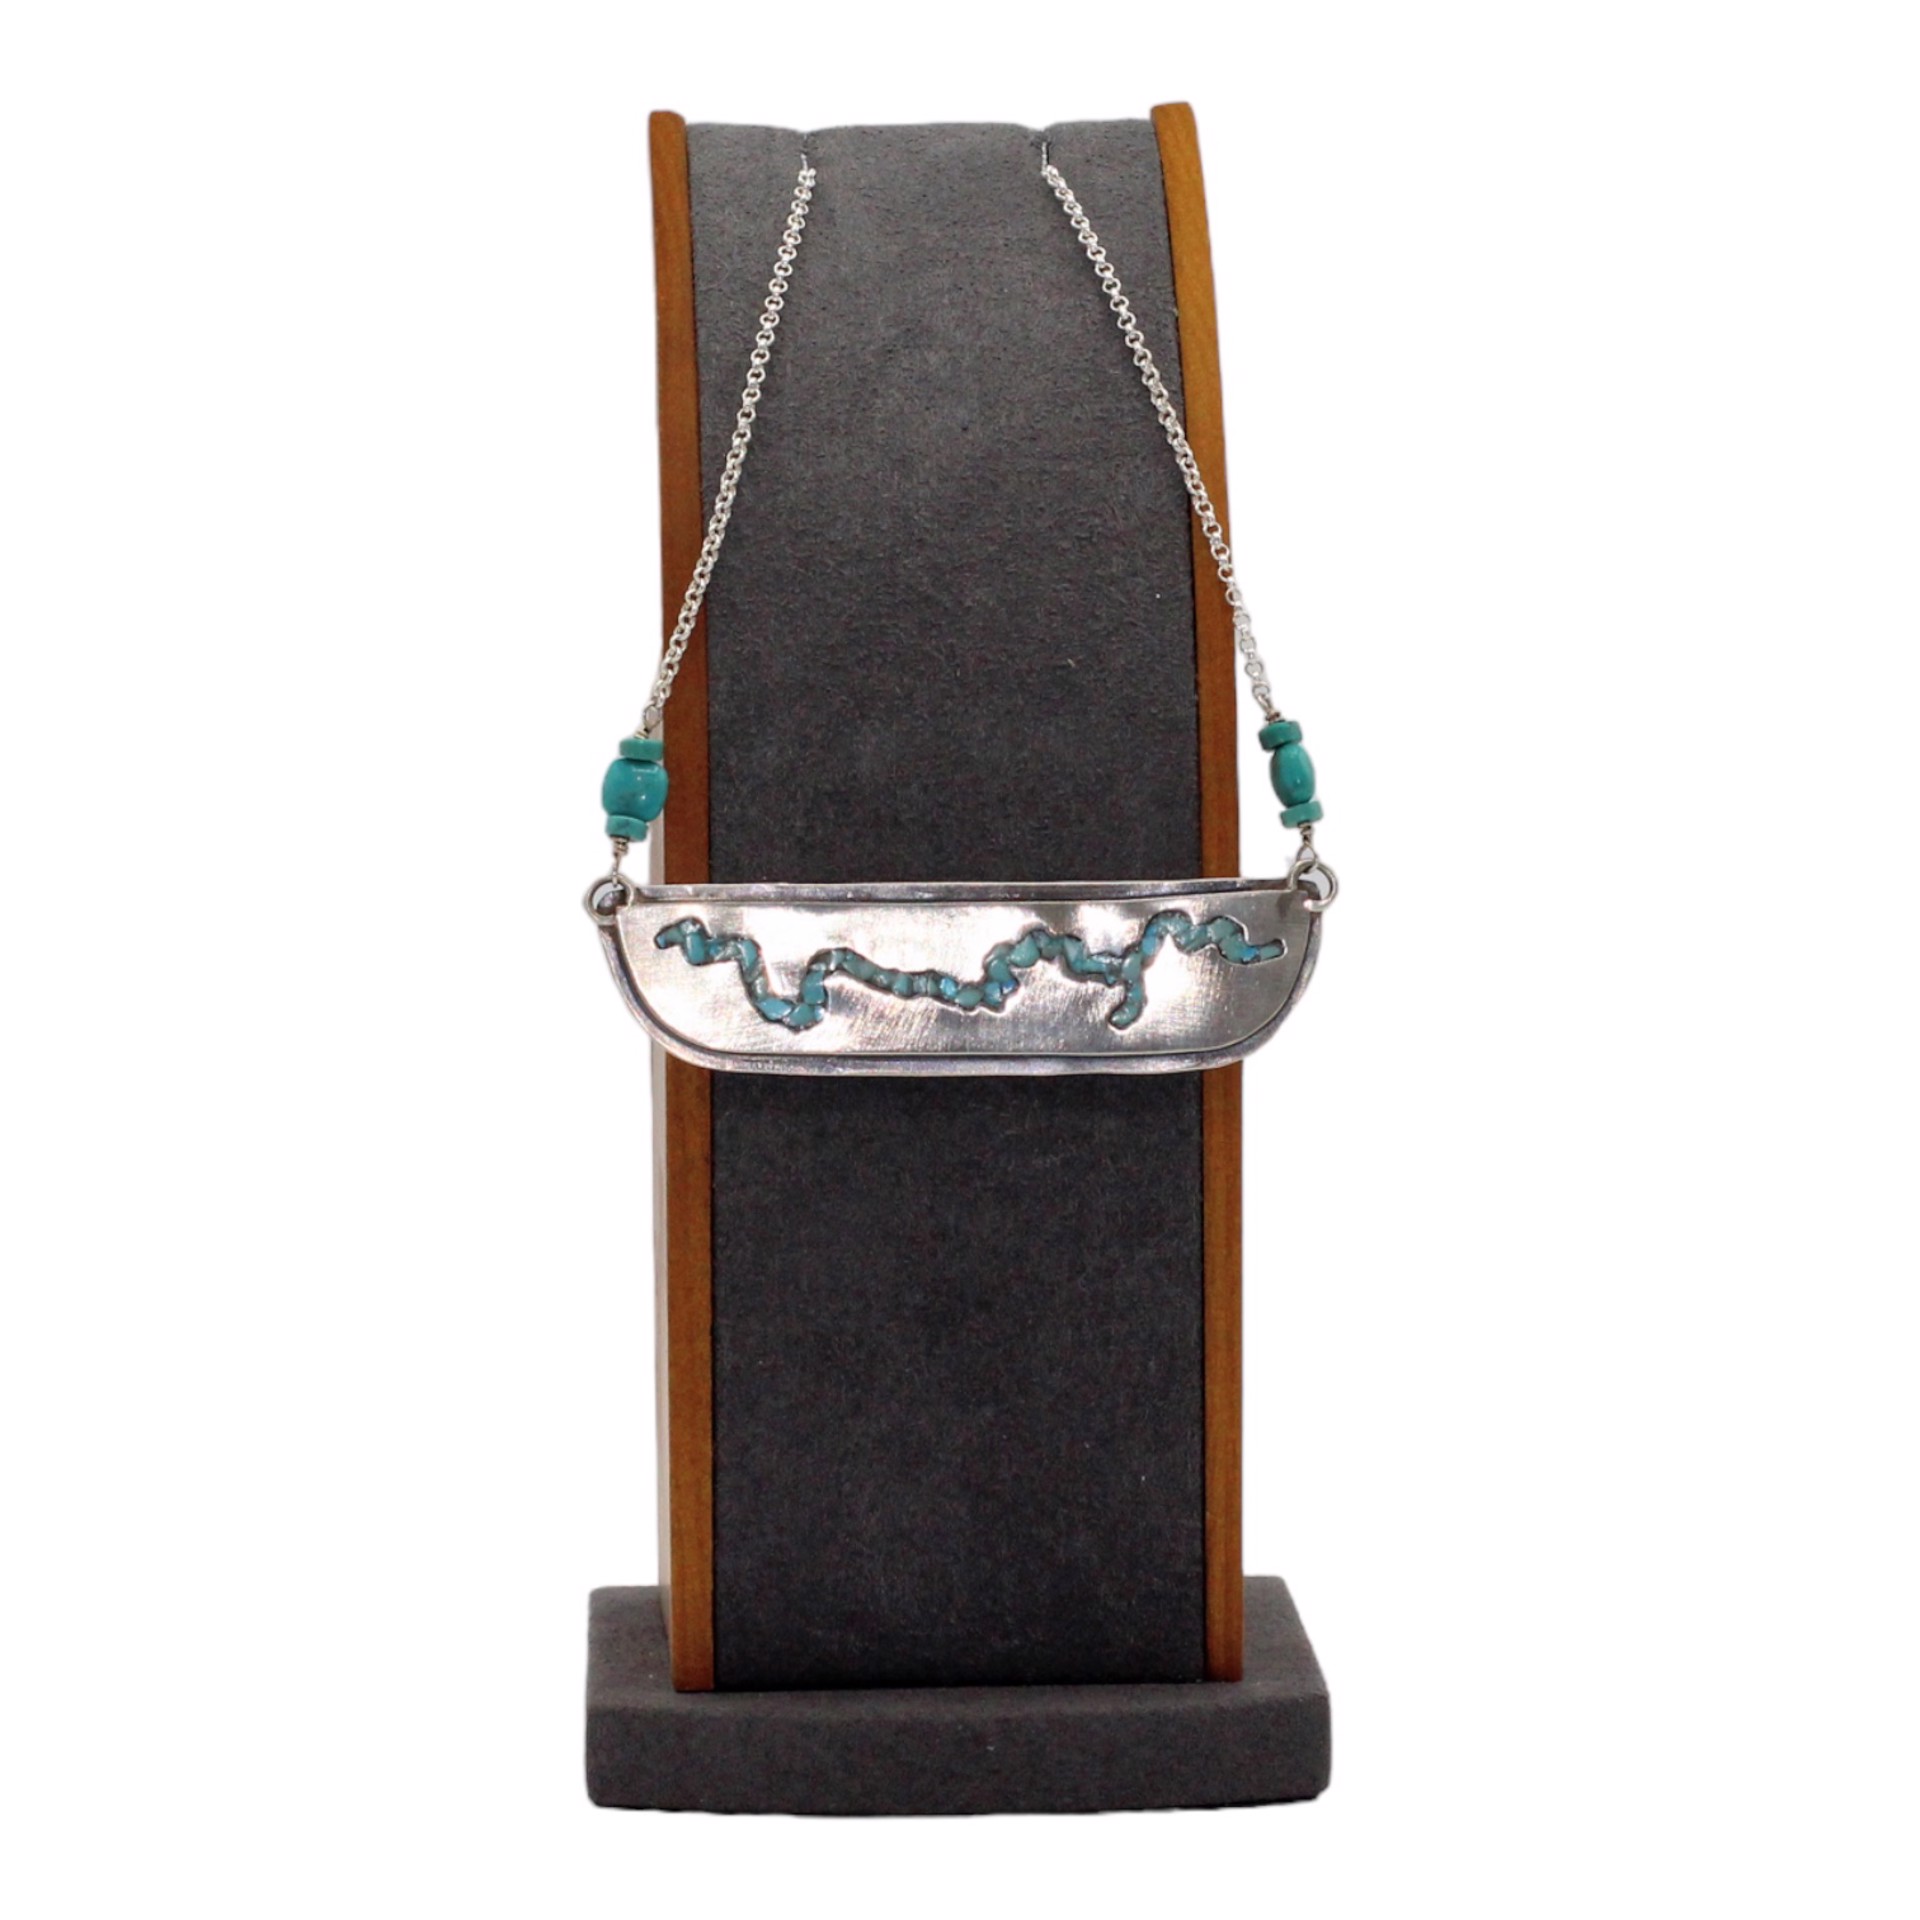 Blackfoot River with Turquoise Inlay Necklace by Emily Dubrawski